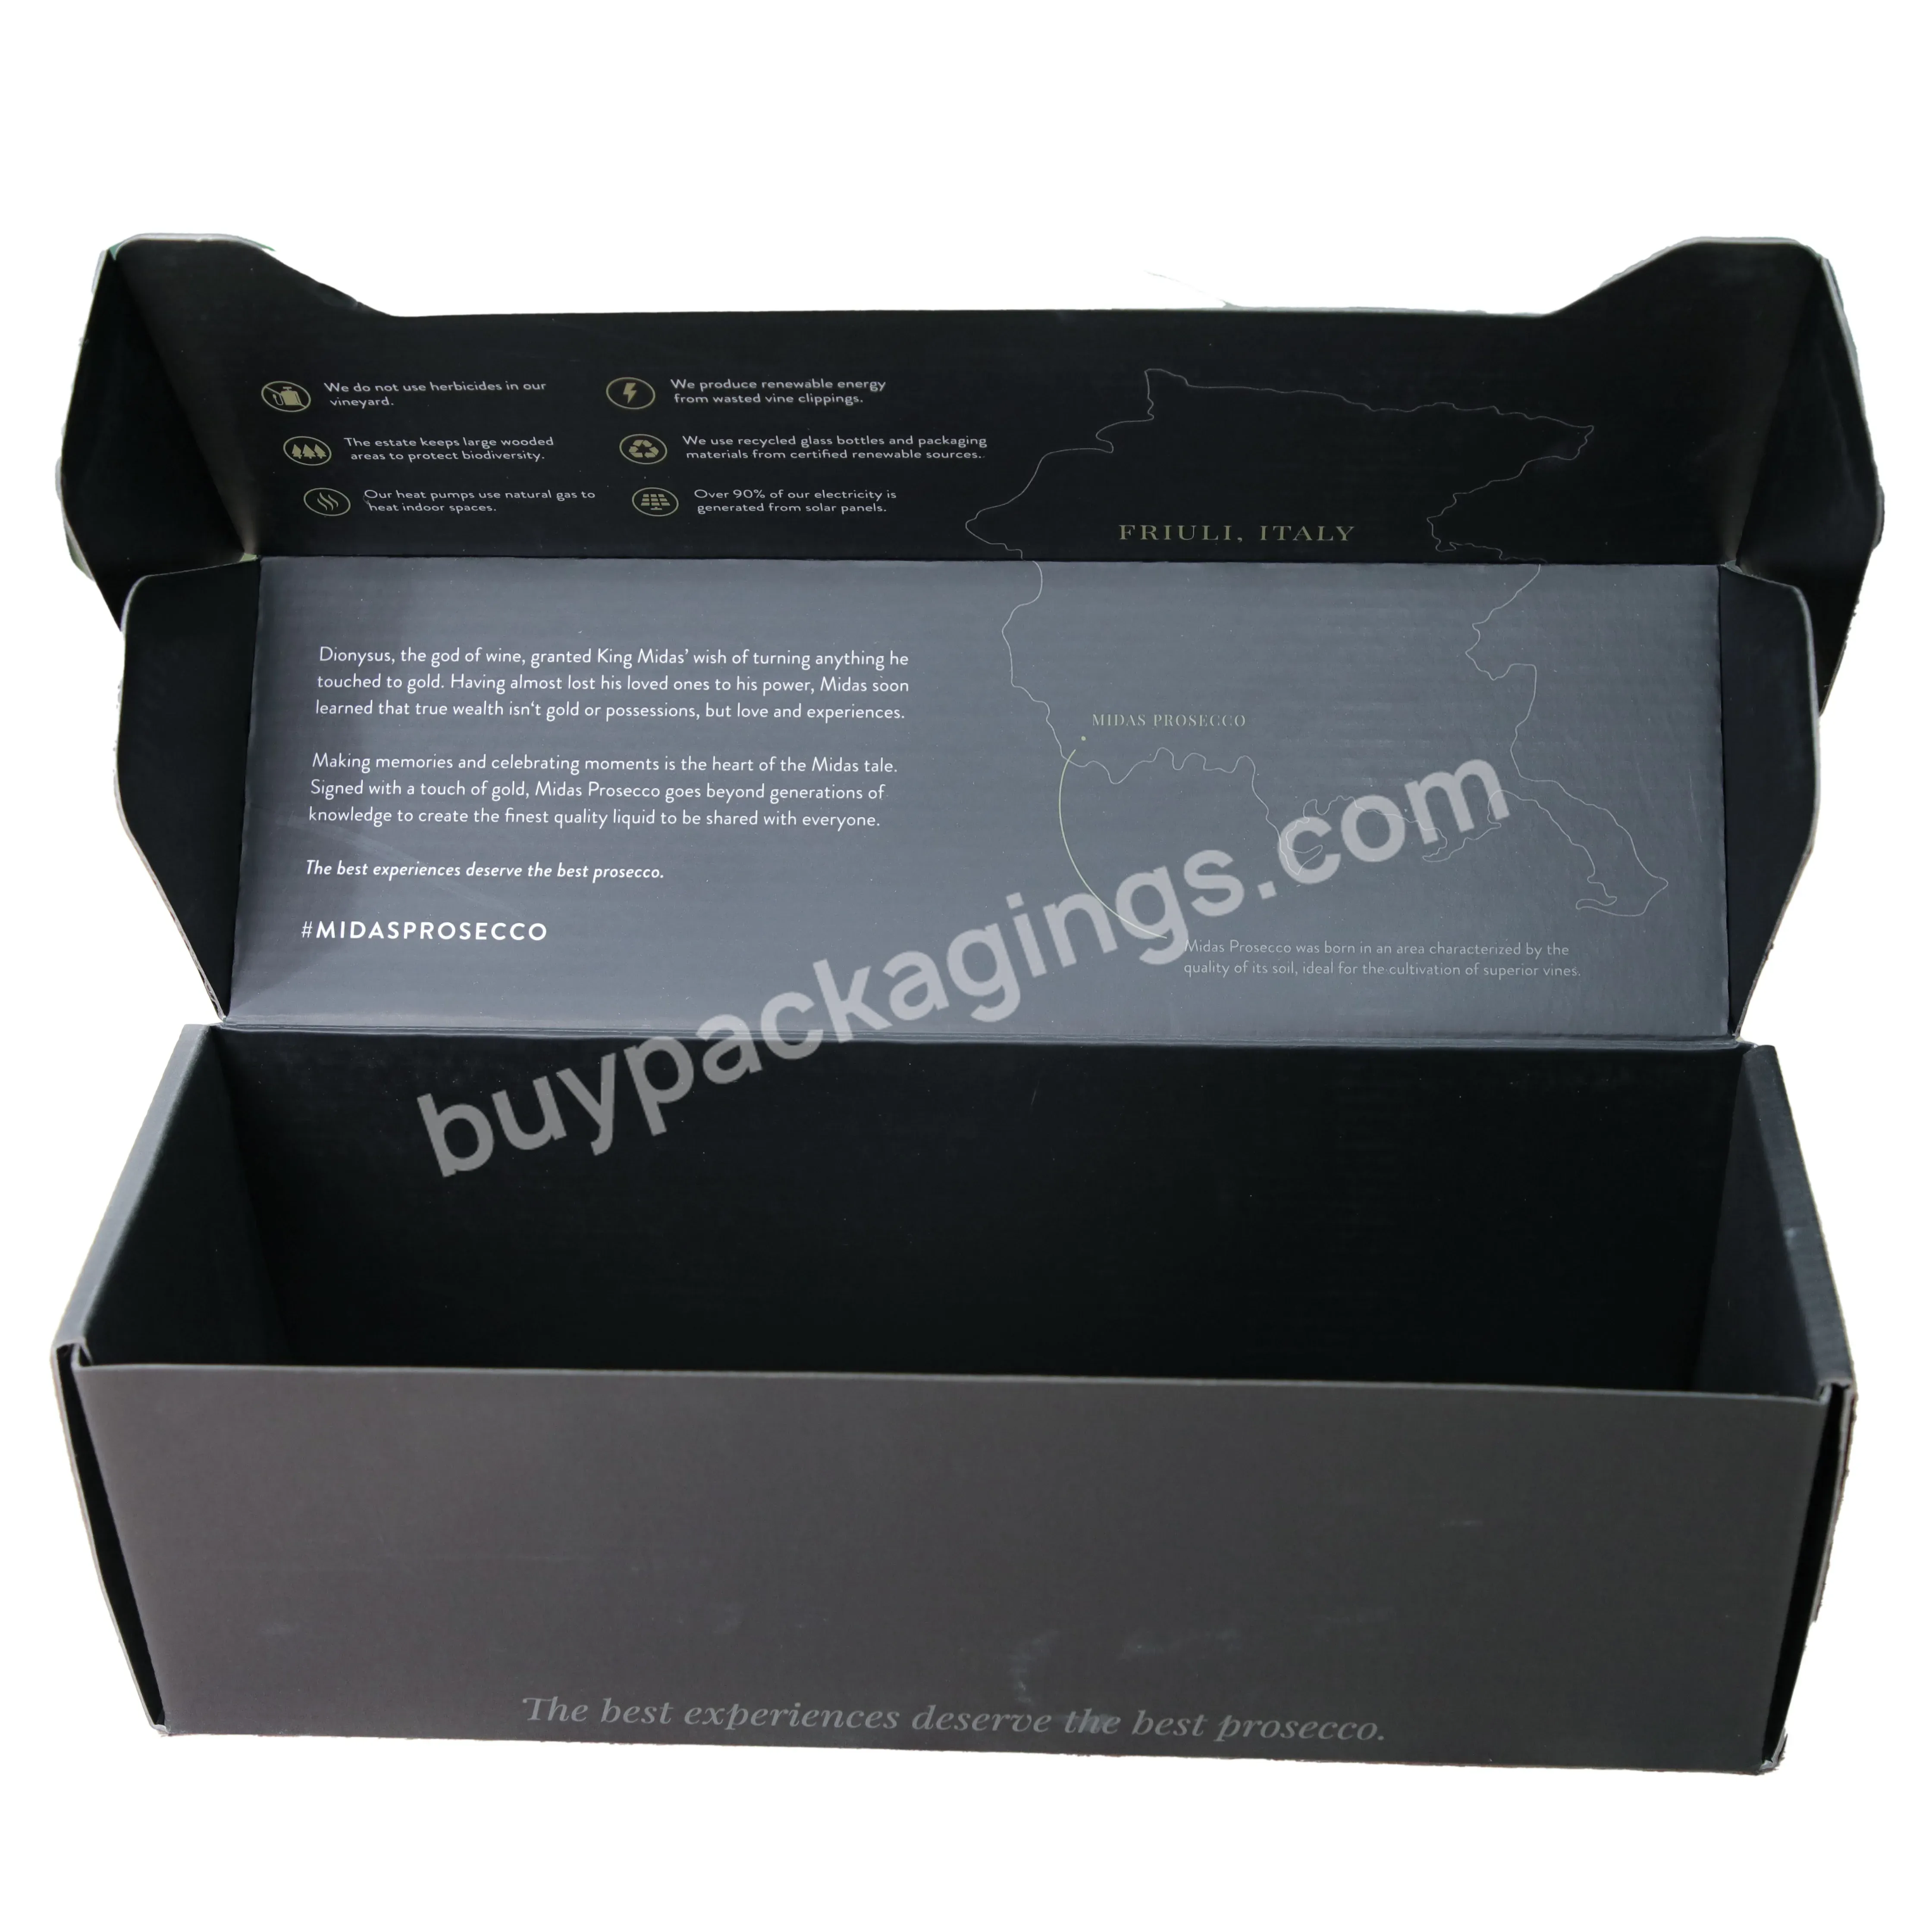 Wholesale Custom Good Price Square Mailer Box Factory Supply Competitive Price Shoe Box